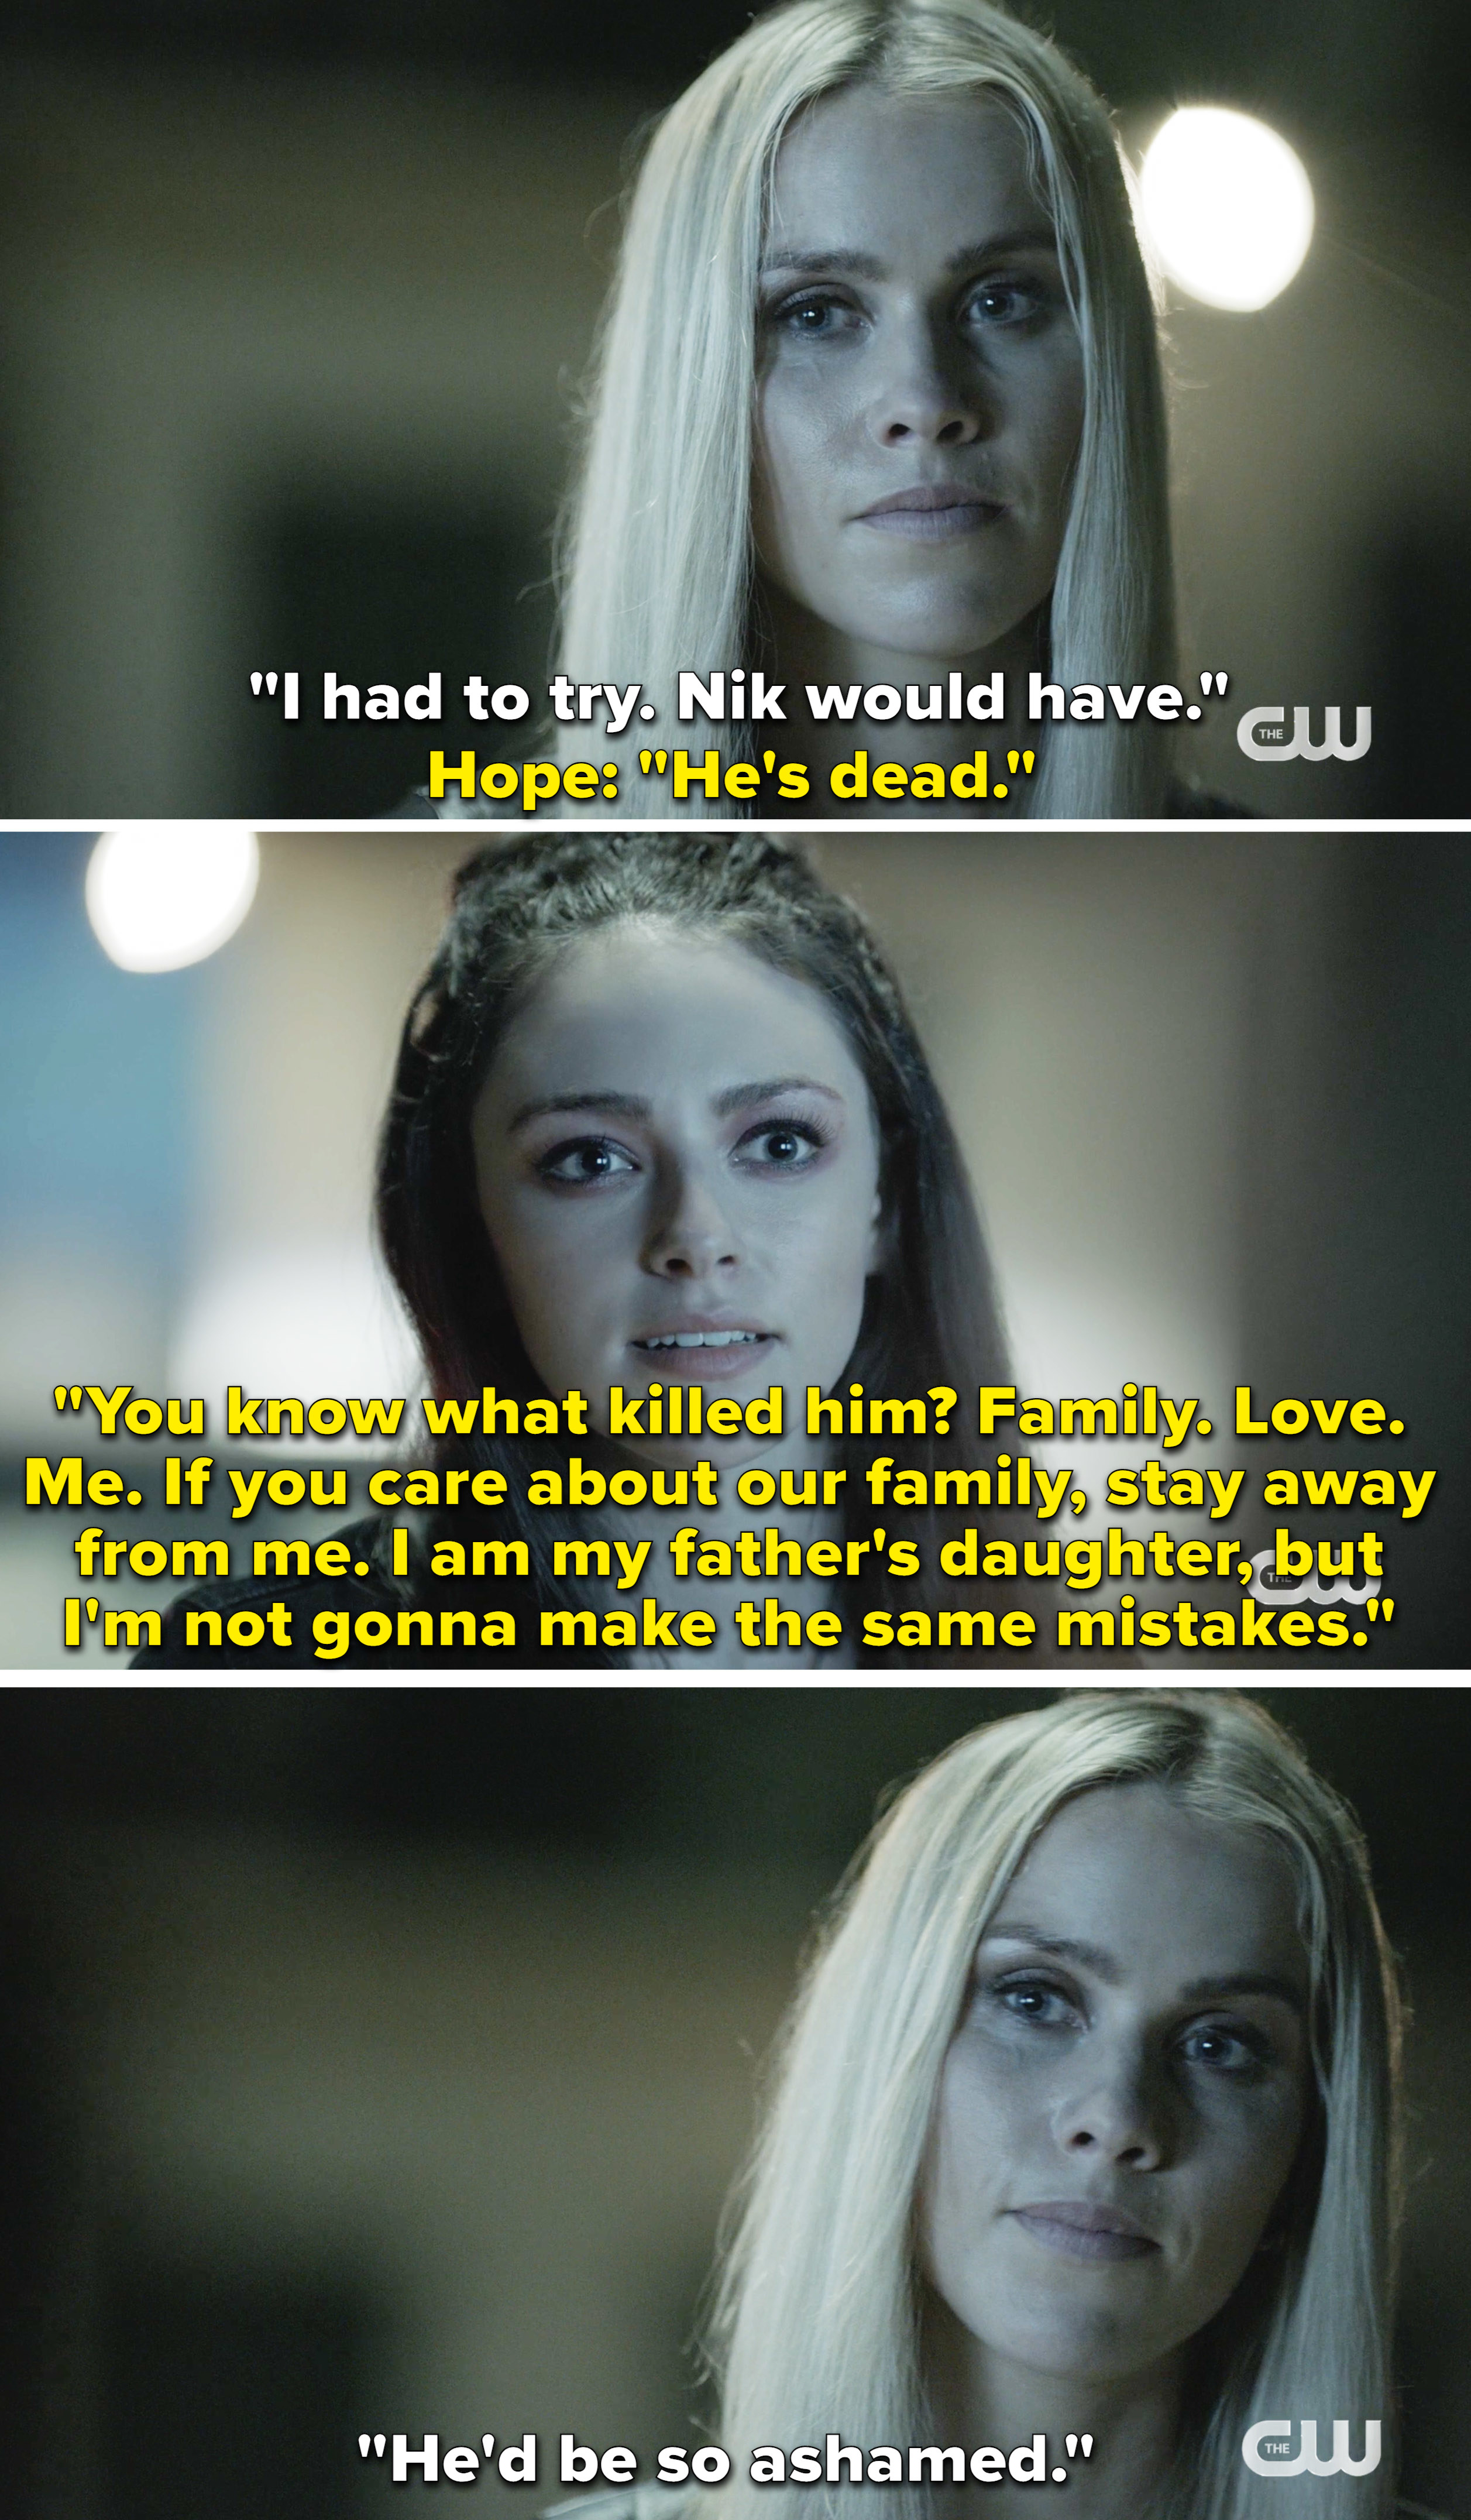 Hope saying she&#x27;s her father&#x27;s daughter, but she won&#x27;t make the same mistakes. And Rebekah saying he would be ashamed of her